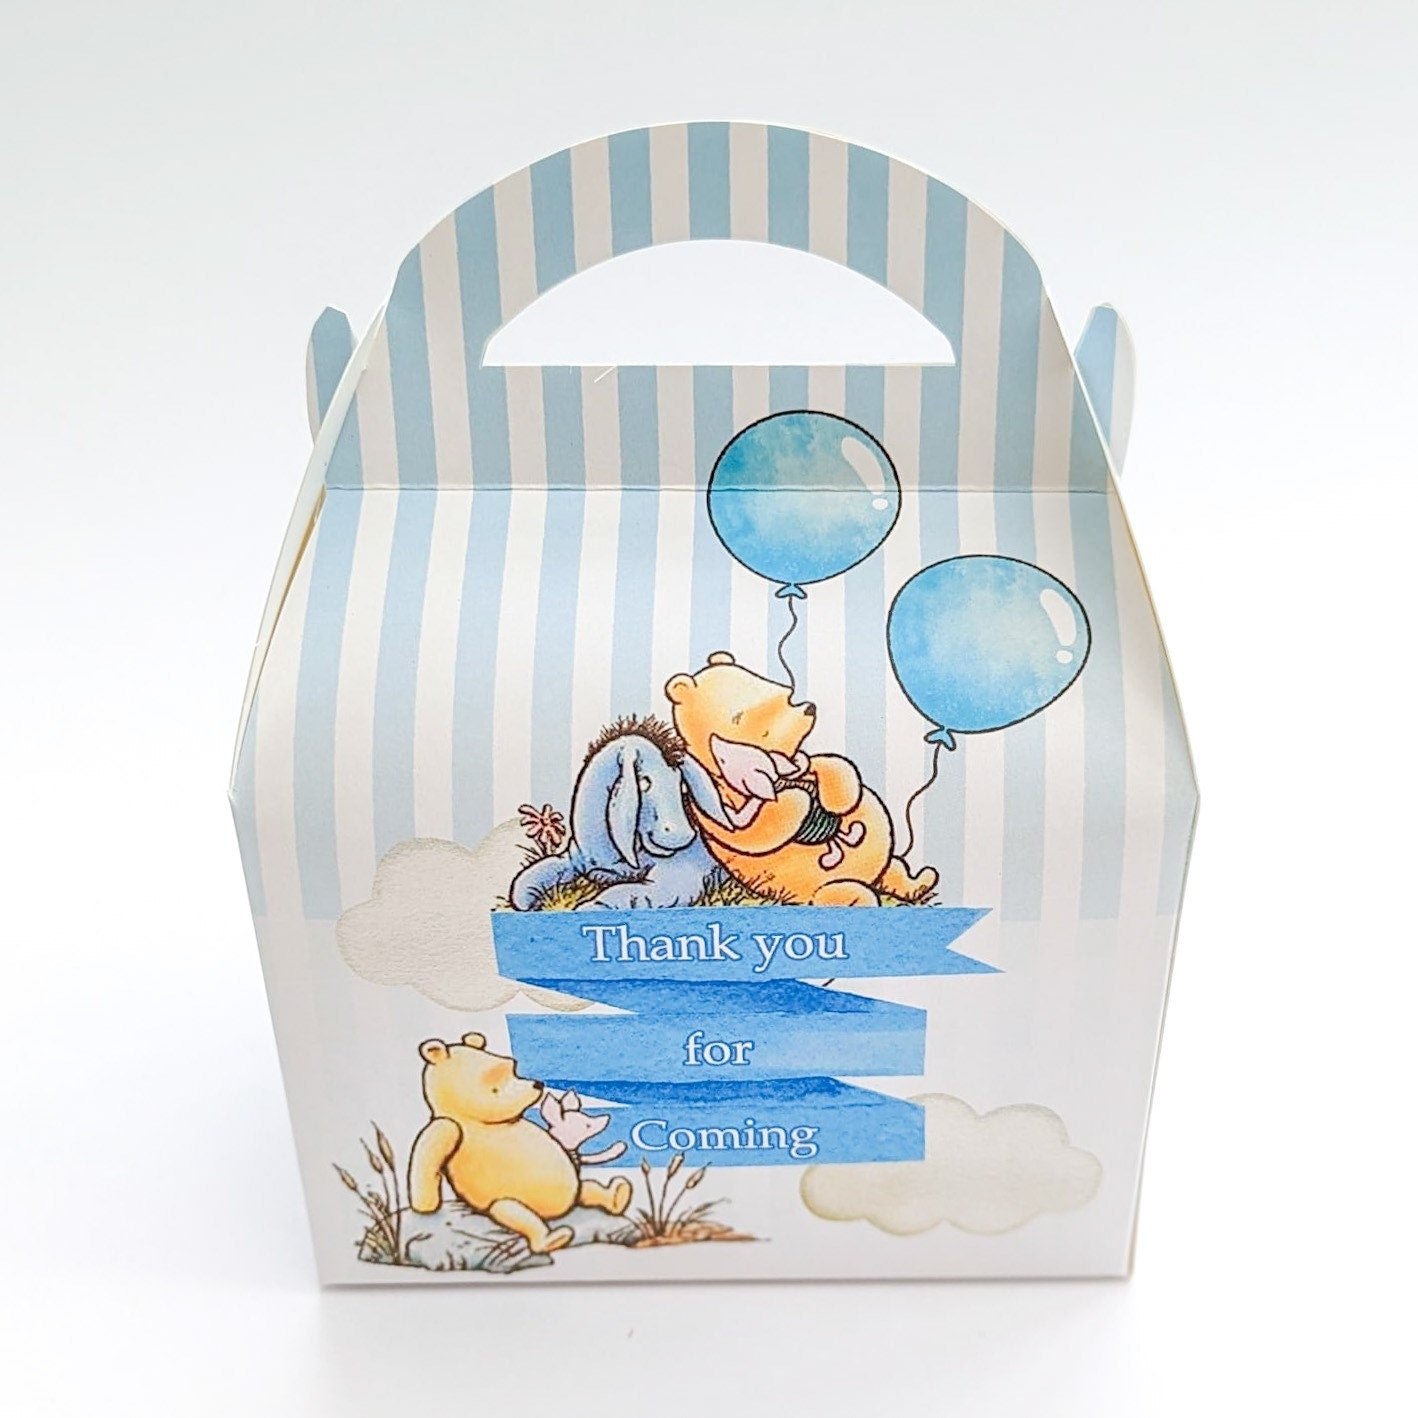 Winnie the Pooh classic floral Personalised Children’s Party Box Gift Bag Favour